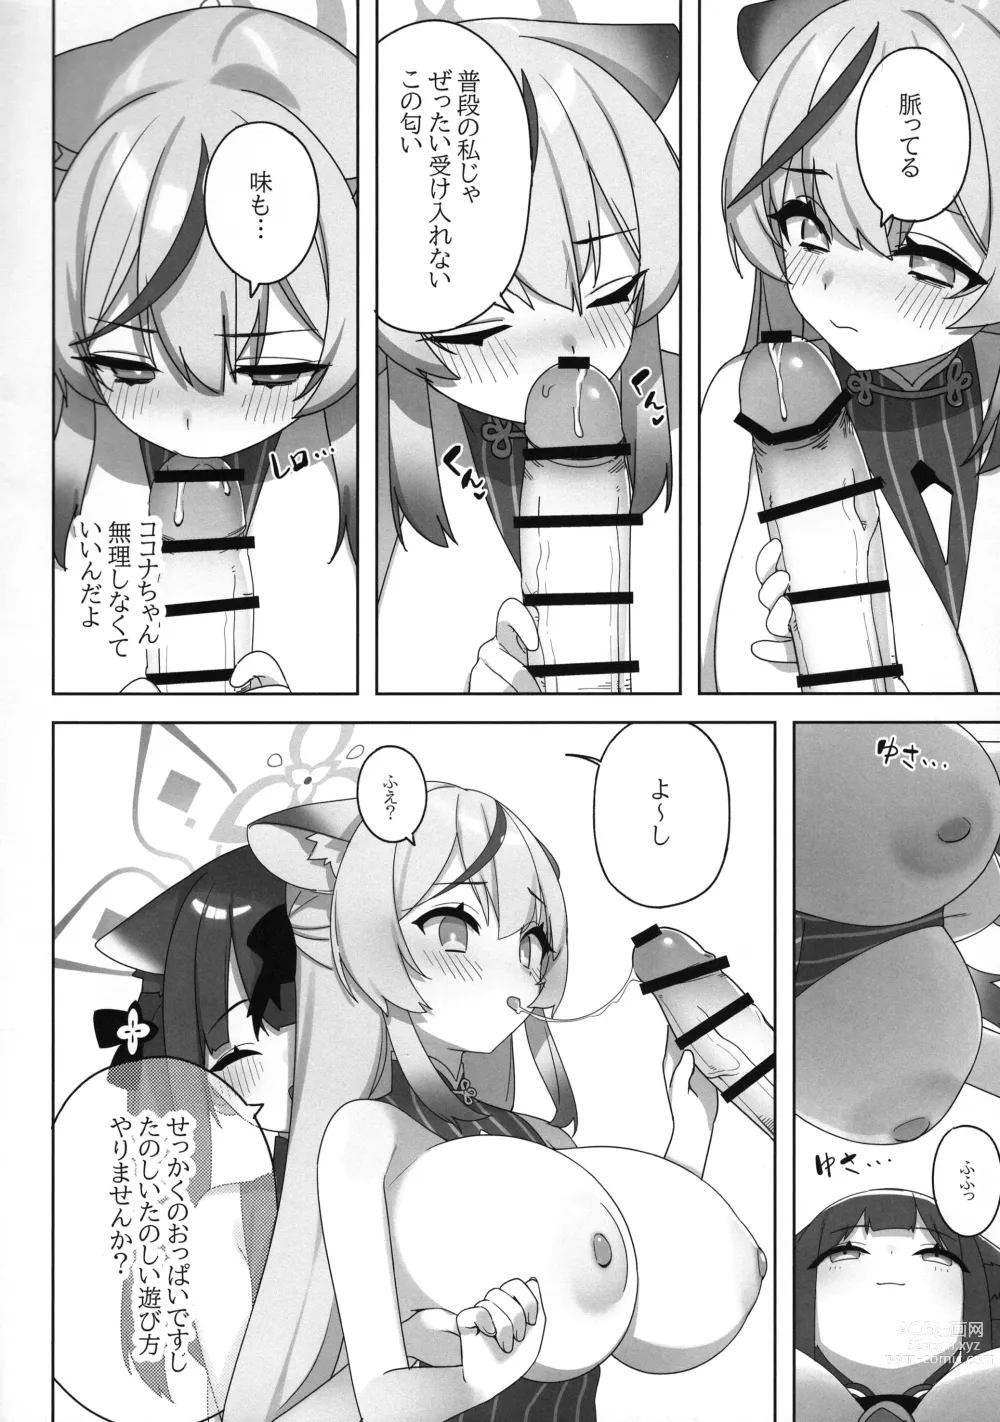 Page 8 of doujinshi Shuekoko Expansion - Live for oppai loli, Die for oppai loli